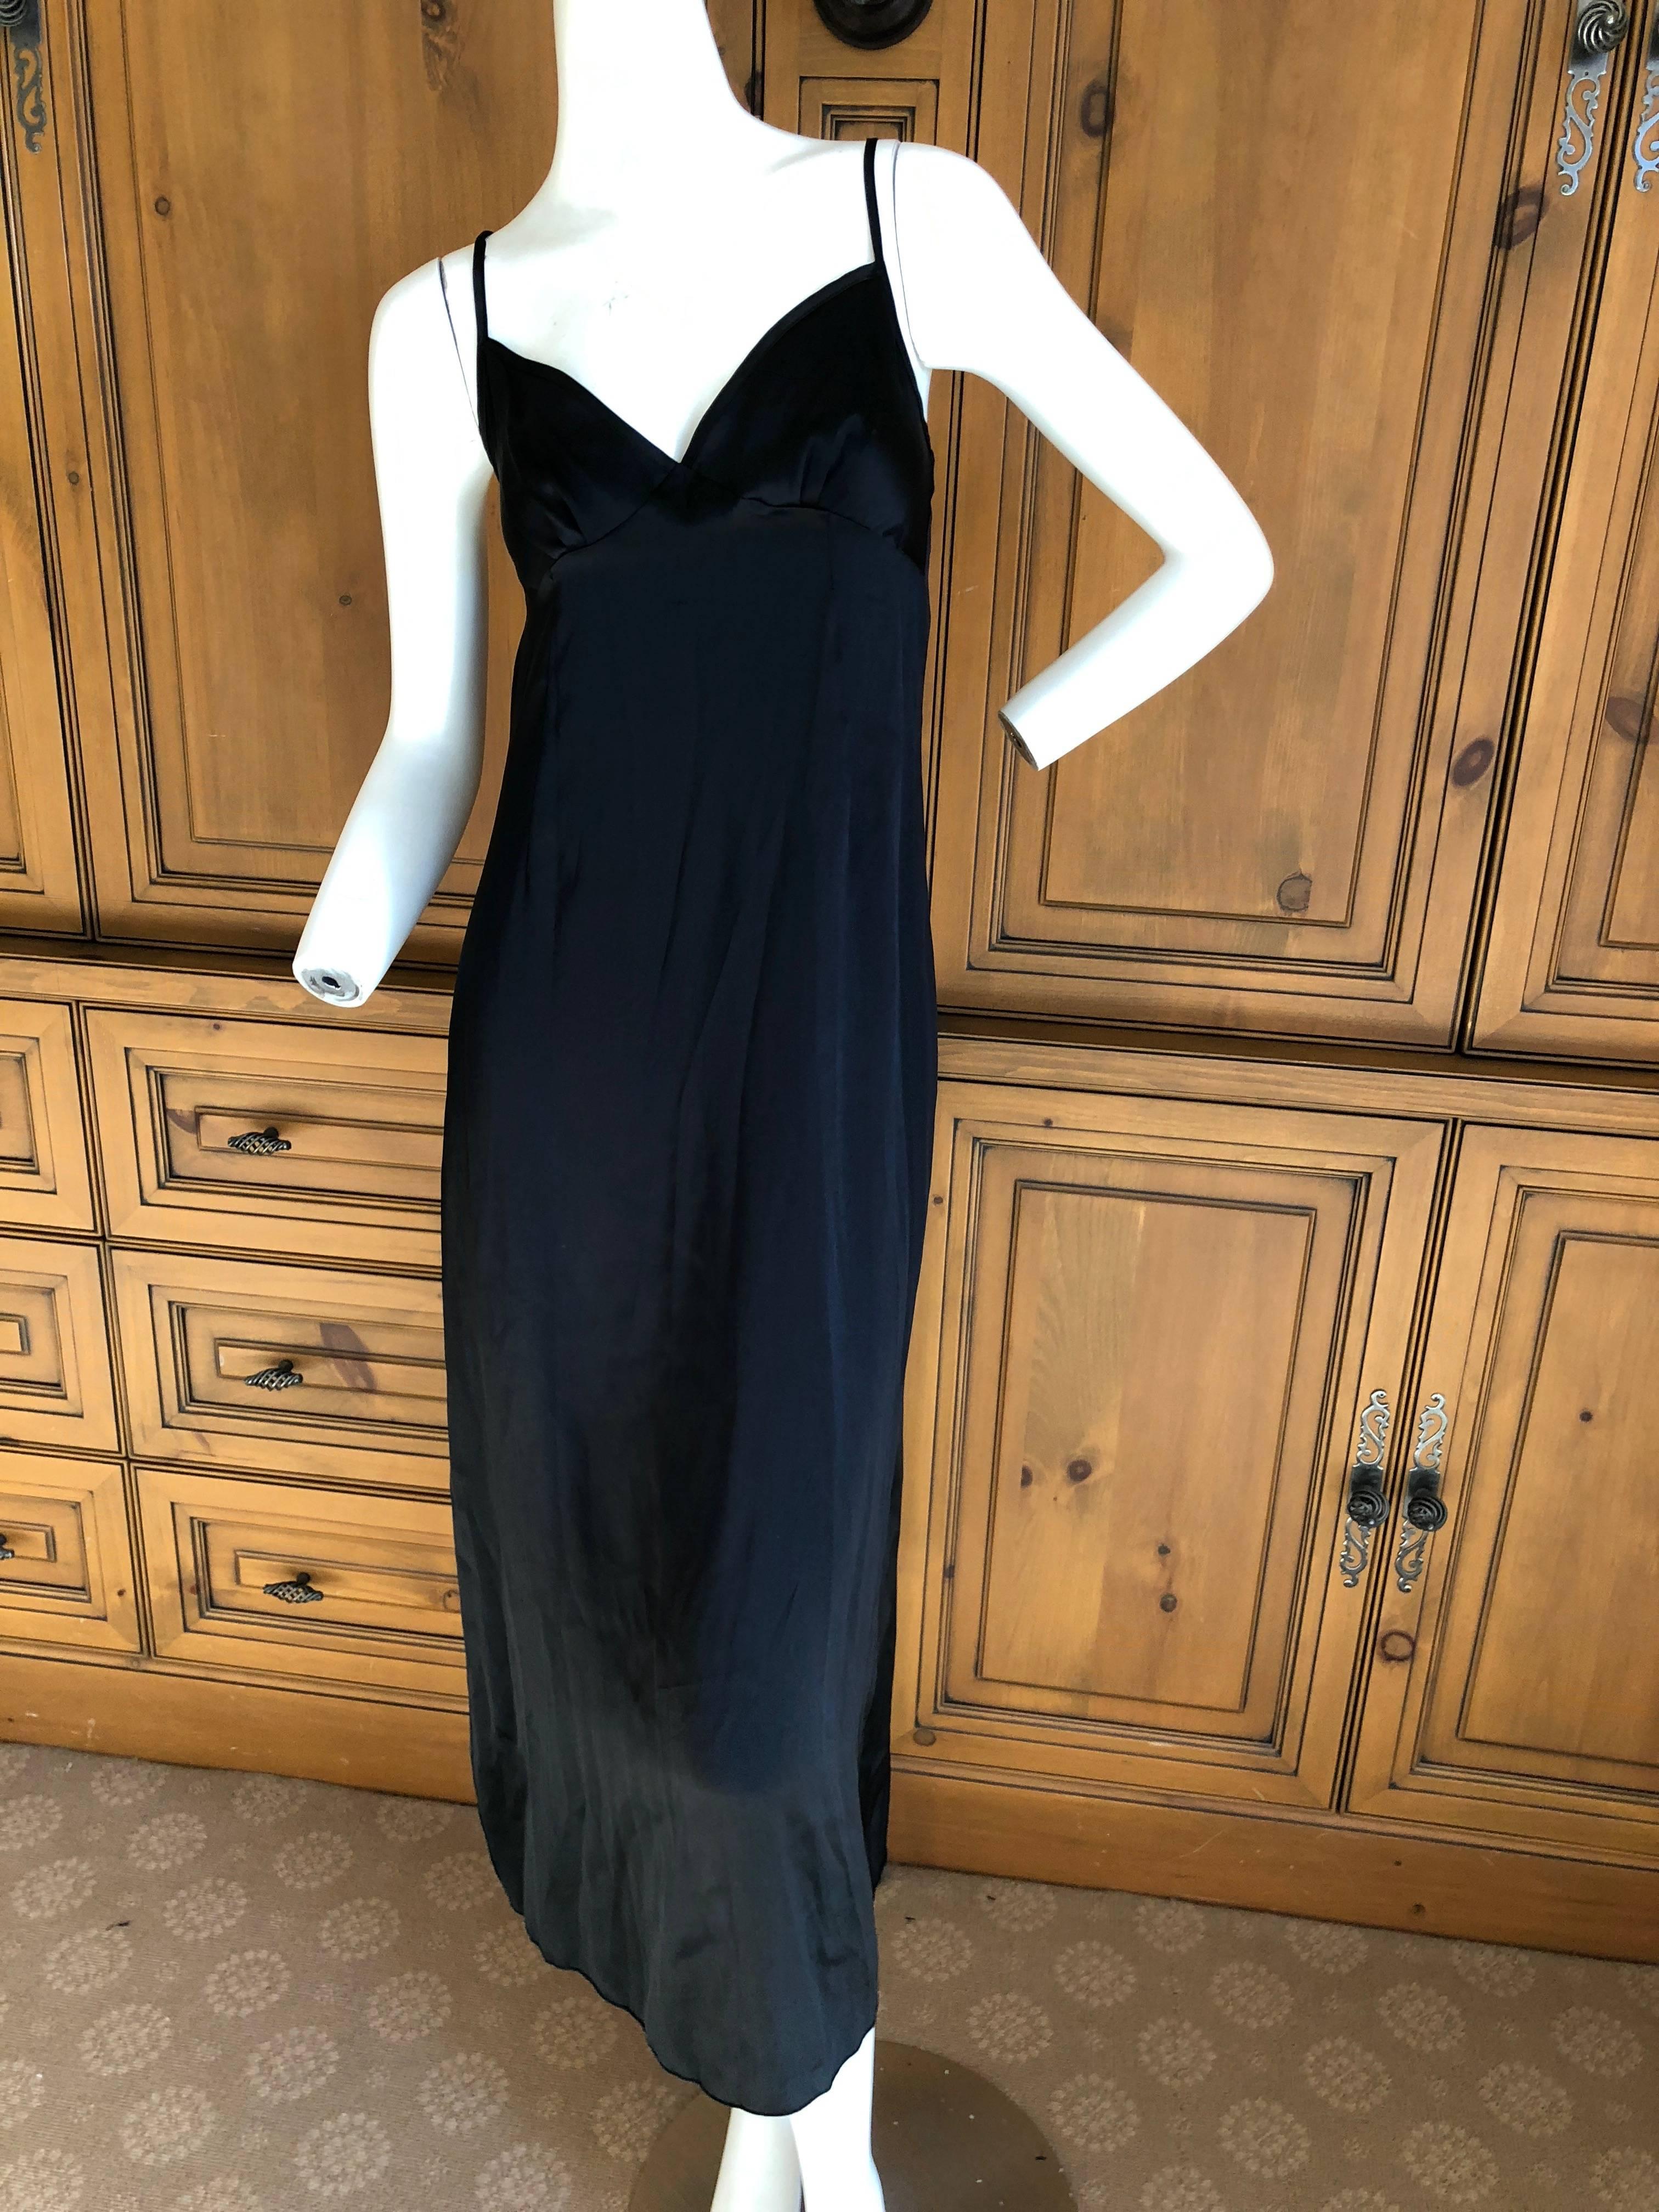 John Galliano Sheer Little Black Dress with Accordion Pleats and Slip For Sale 2